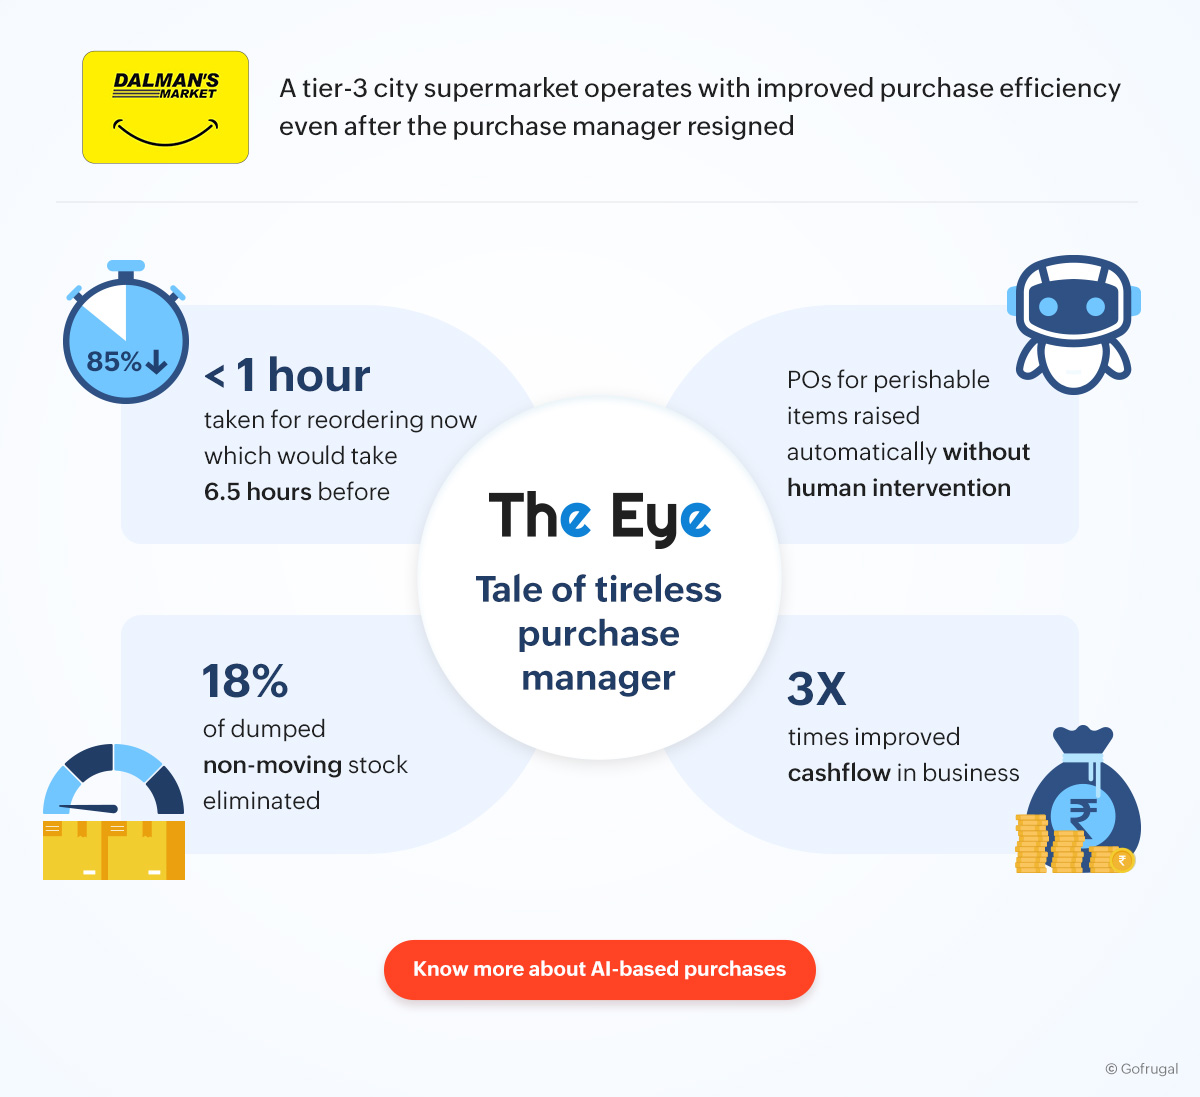 Case study of Dalmans Market - Supermarket that reduced the reordering time by 85% using The Eye b setting up their purchases in autopilot, removed the dumped non-moving stock, and hence experienced 3 times better cash flow 